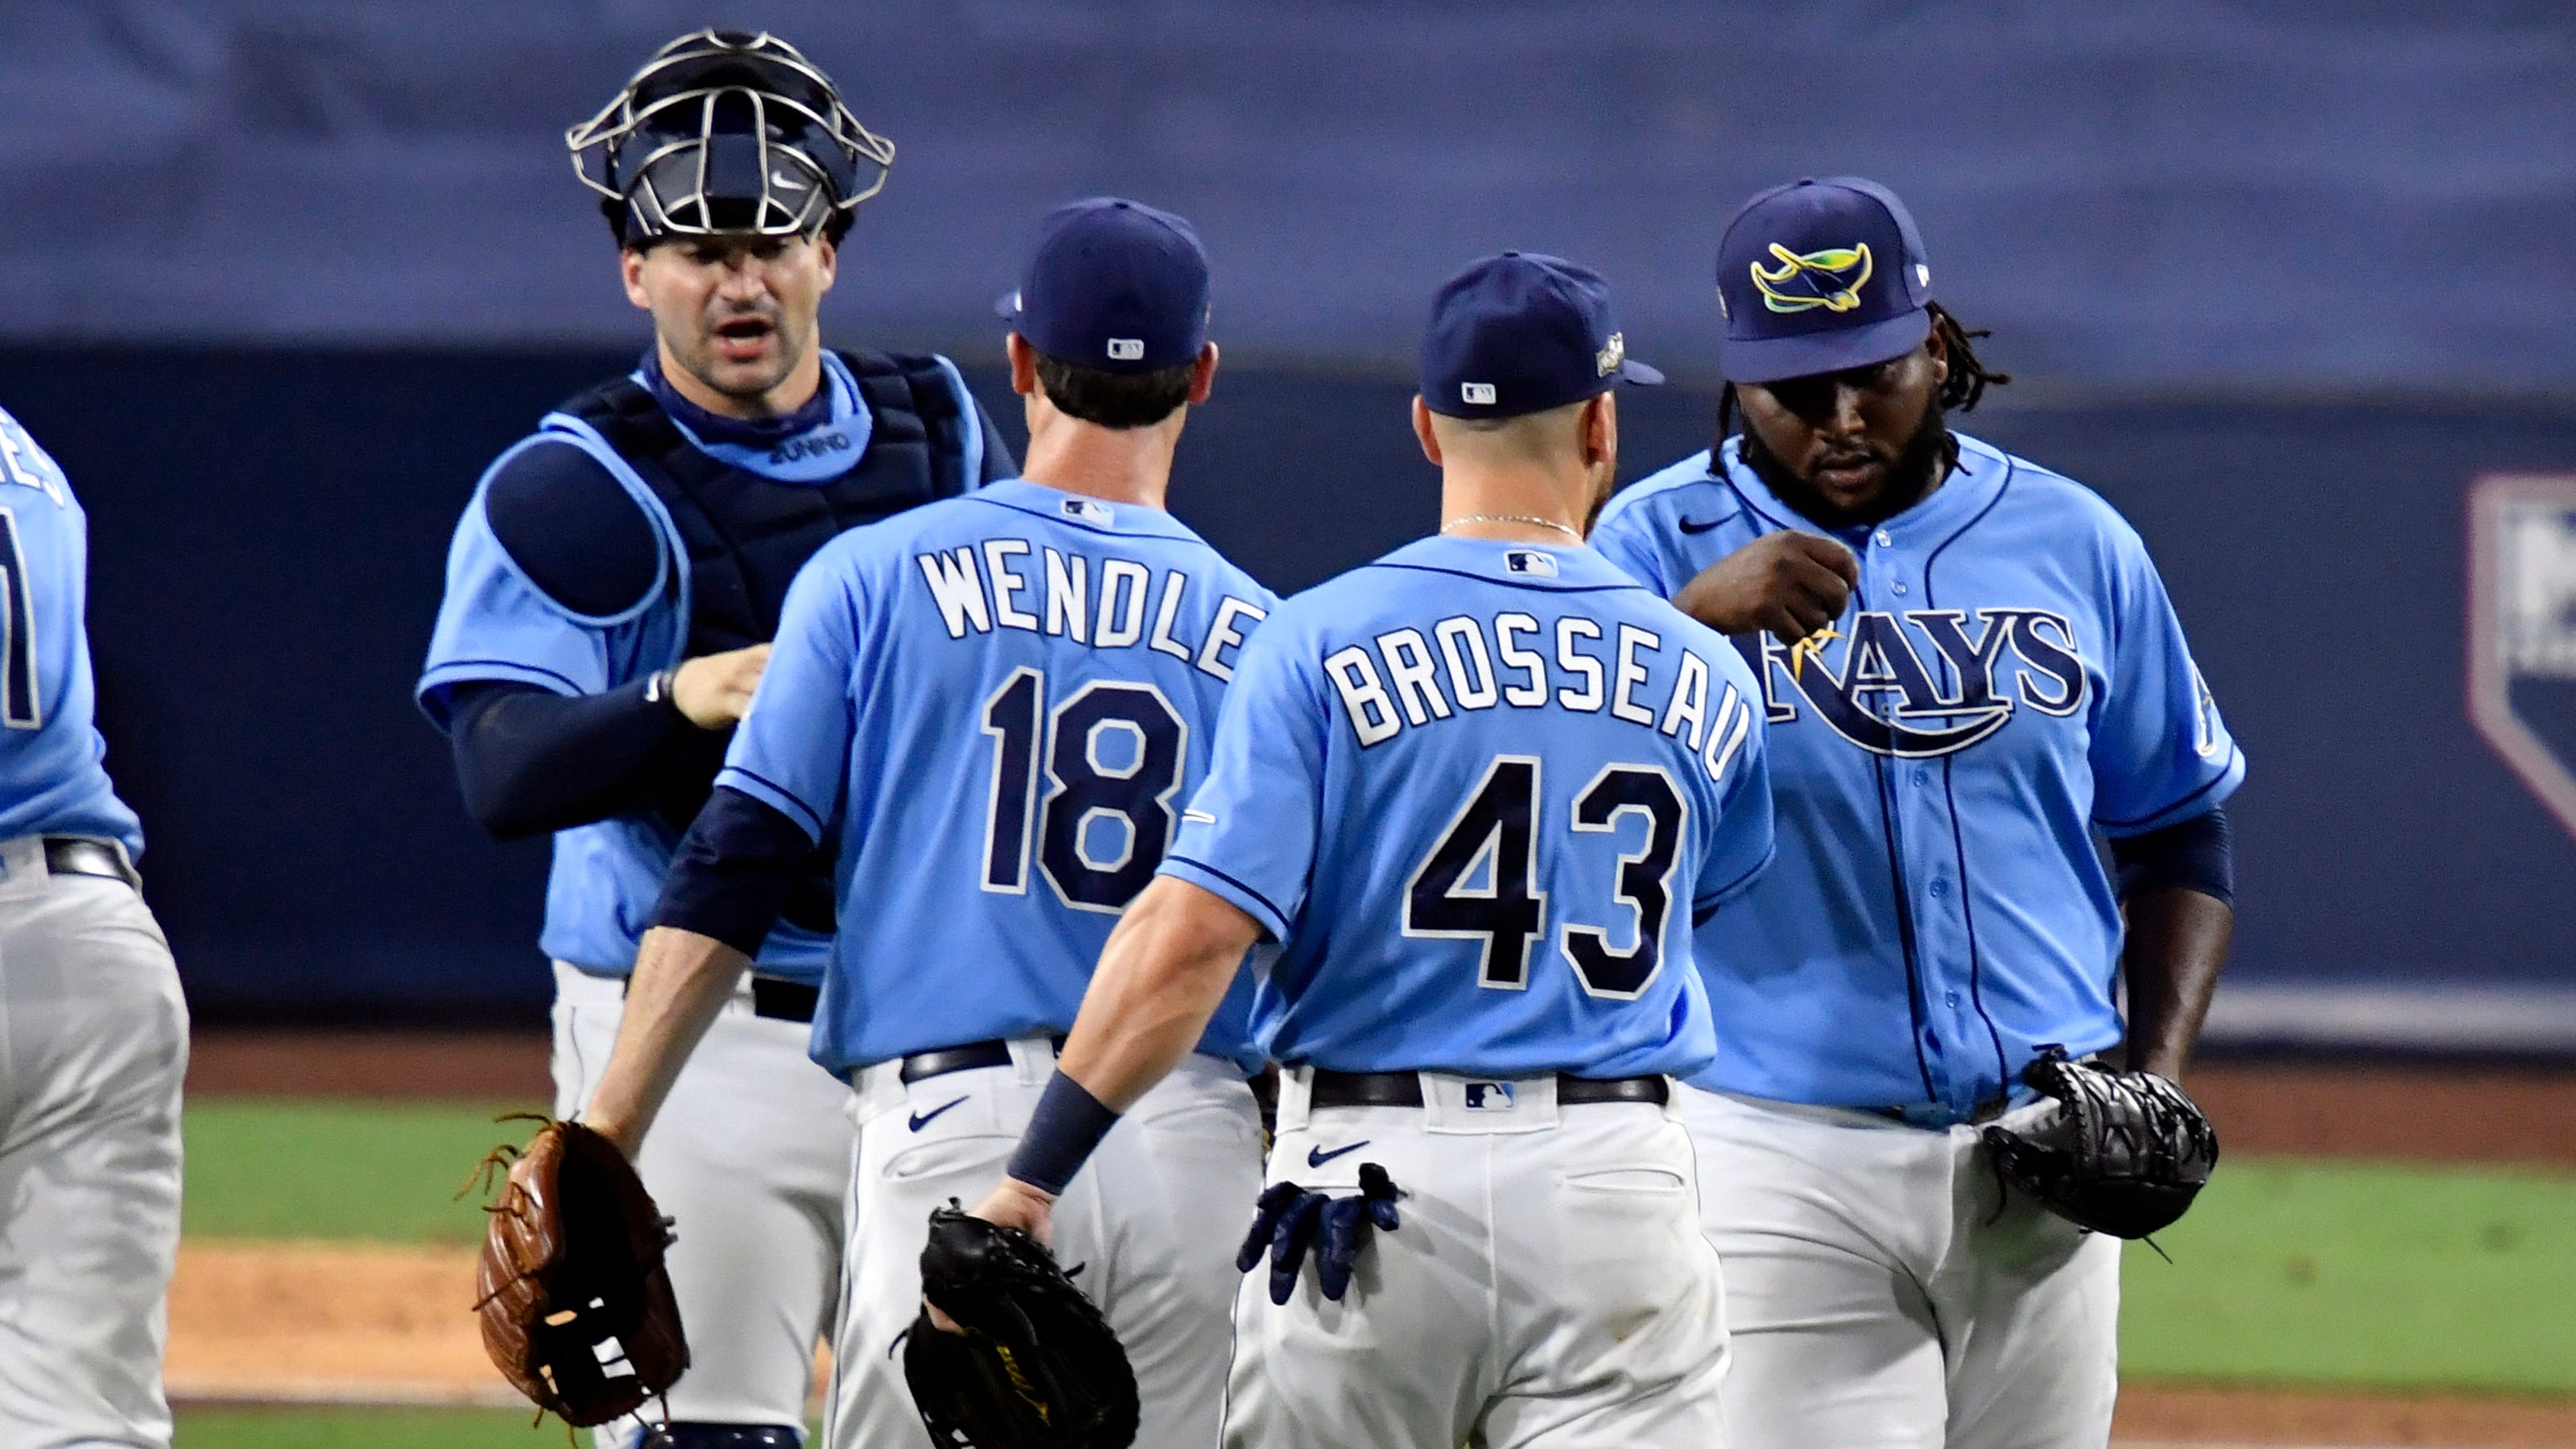 ALCS Rays bandwagon may be expanding after Game 1 win over Astros